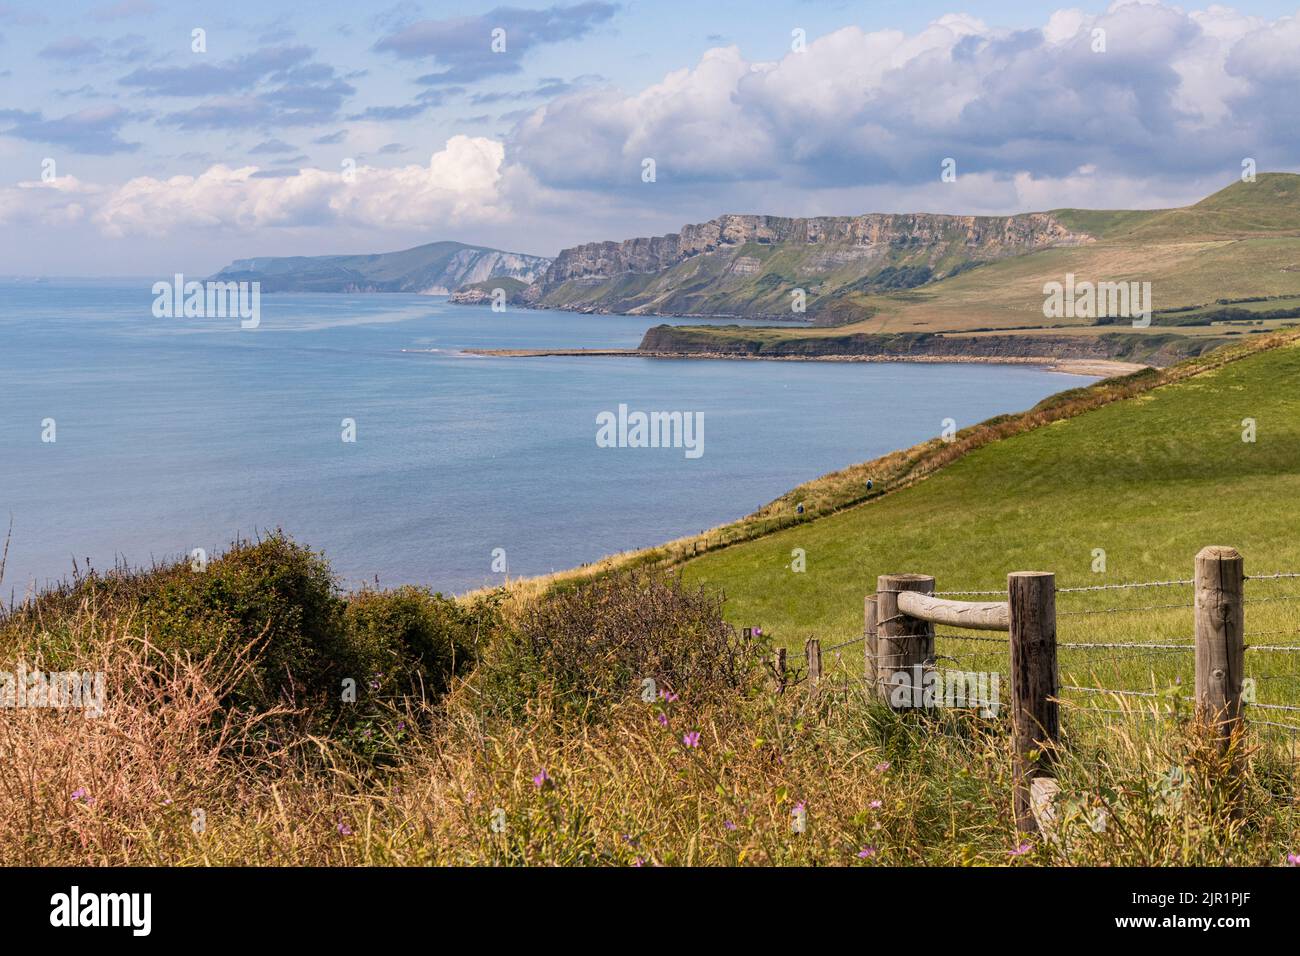 View from the clifftop on the Dorset stretch of the south west coast path with the view towards Kimmeridge Bay and Gad Cliff of Worbarrow Stock Photo